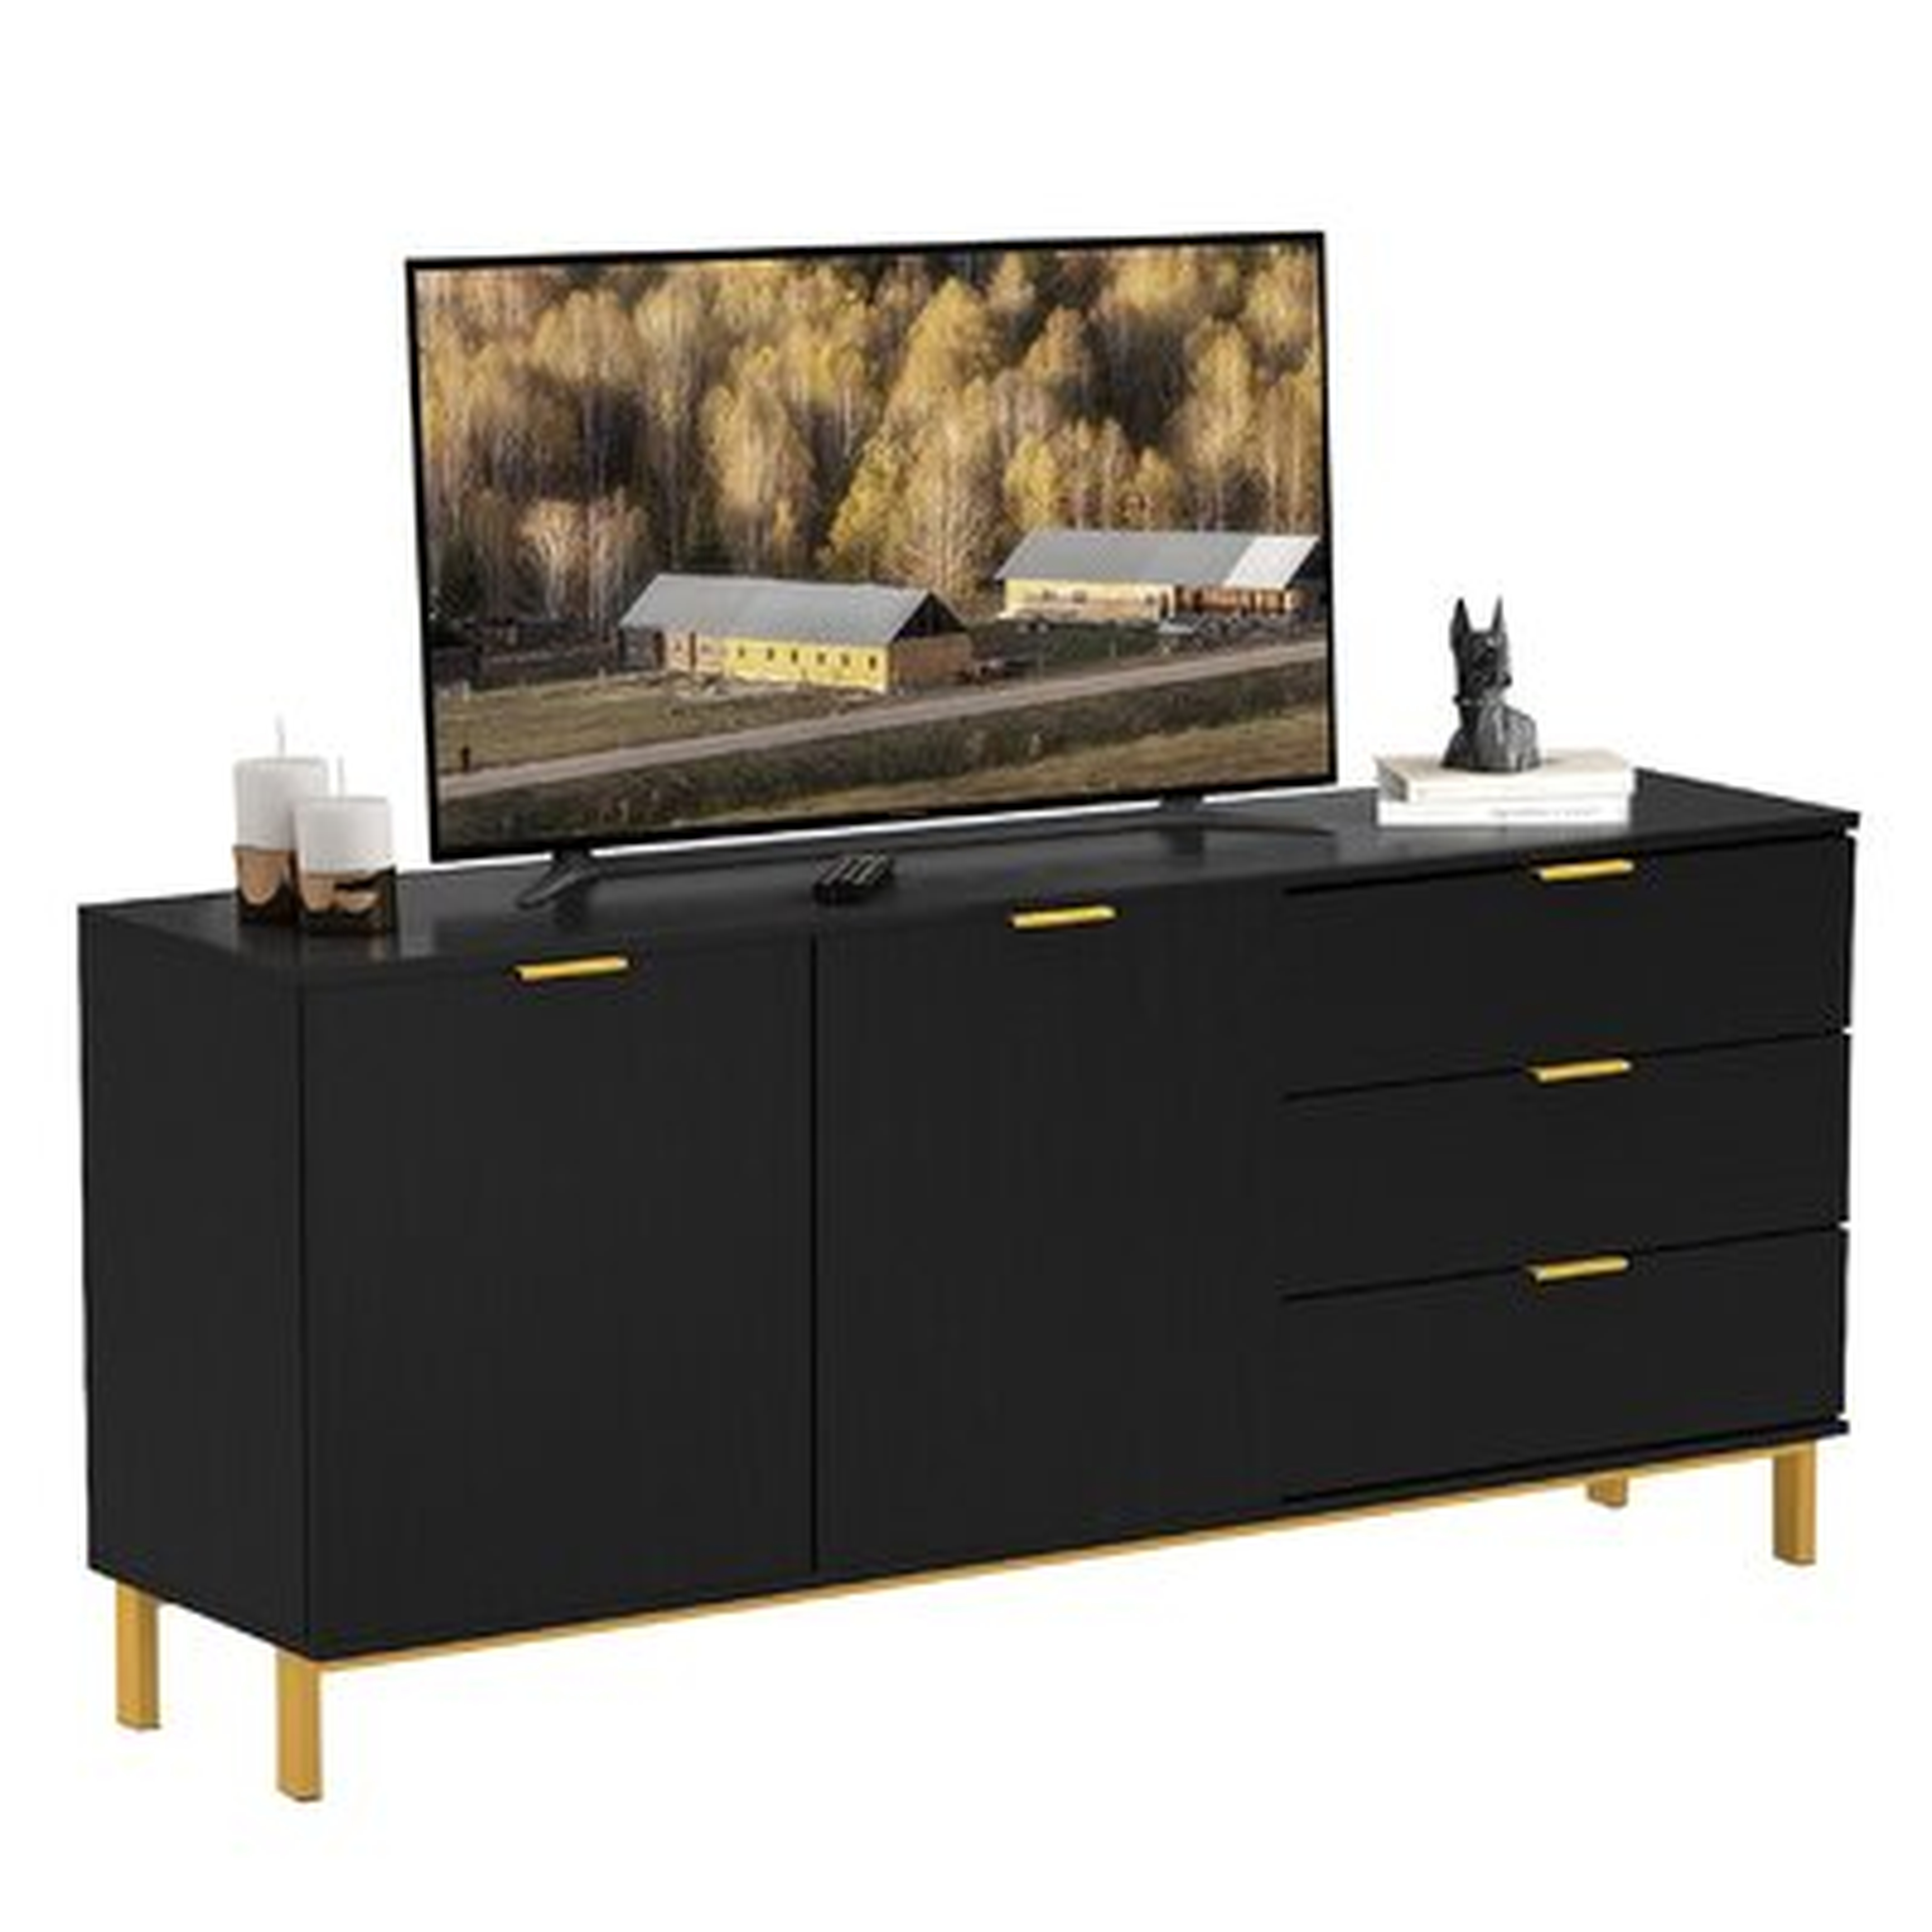 Modern 62.9" Sideboard Buffet Table TV Rack Wooden Stand With 2 Doors And 3 Drawers, Black - Wayfair